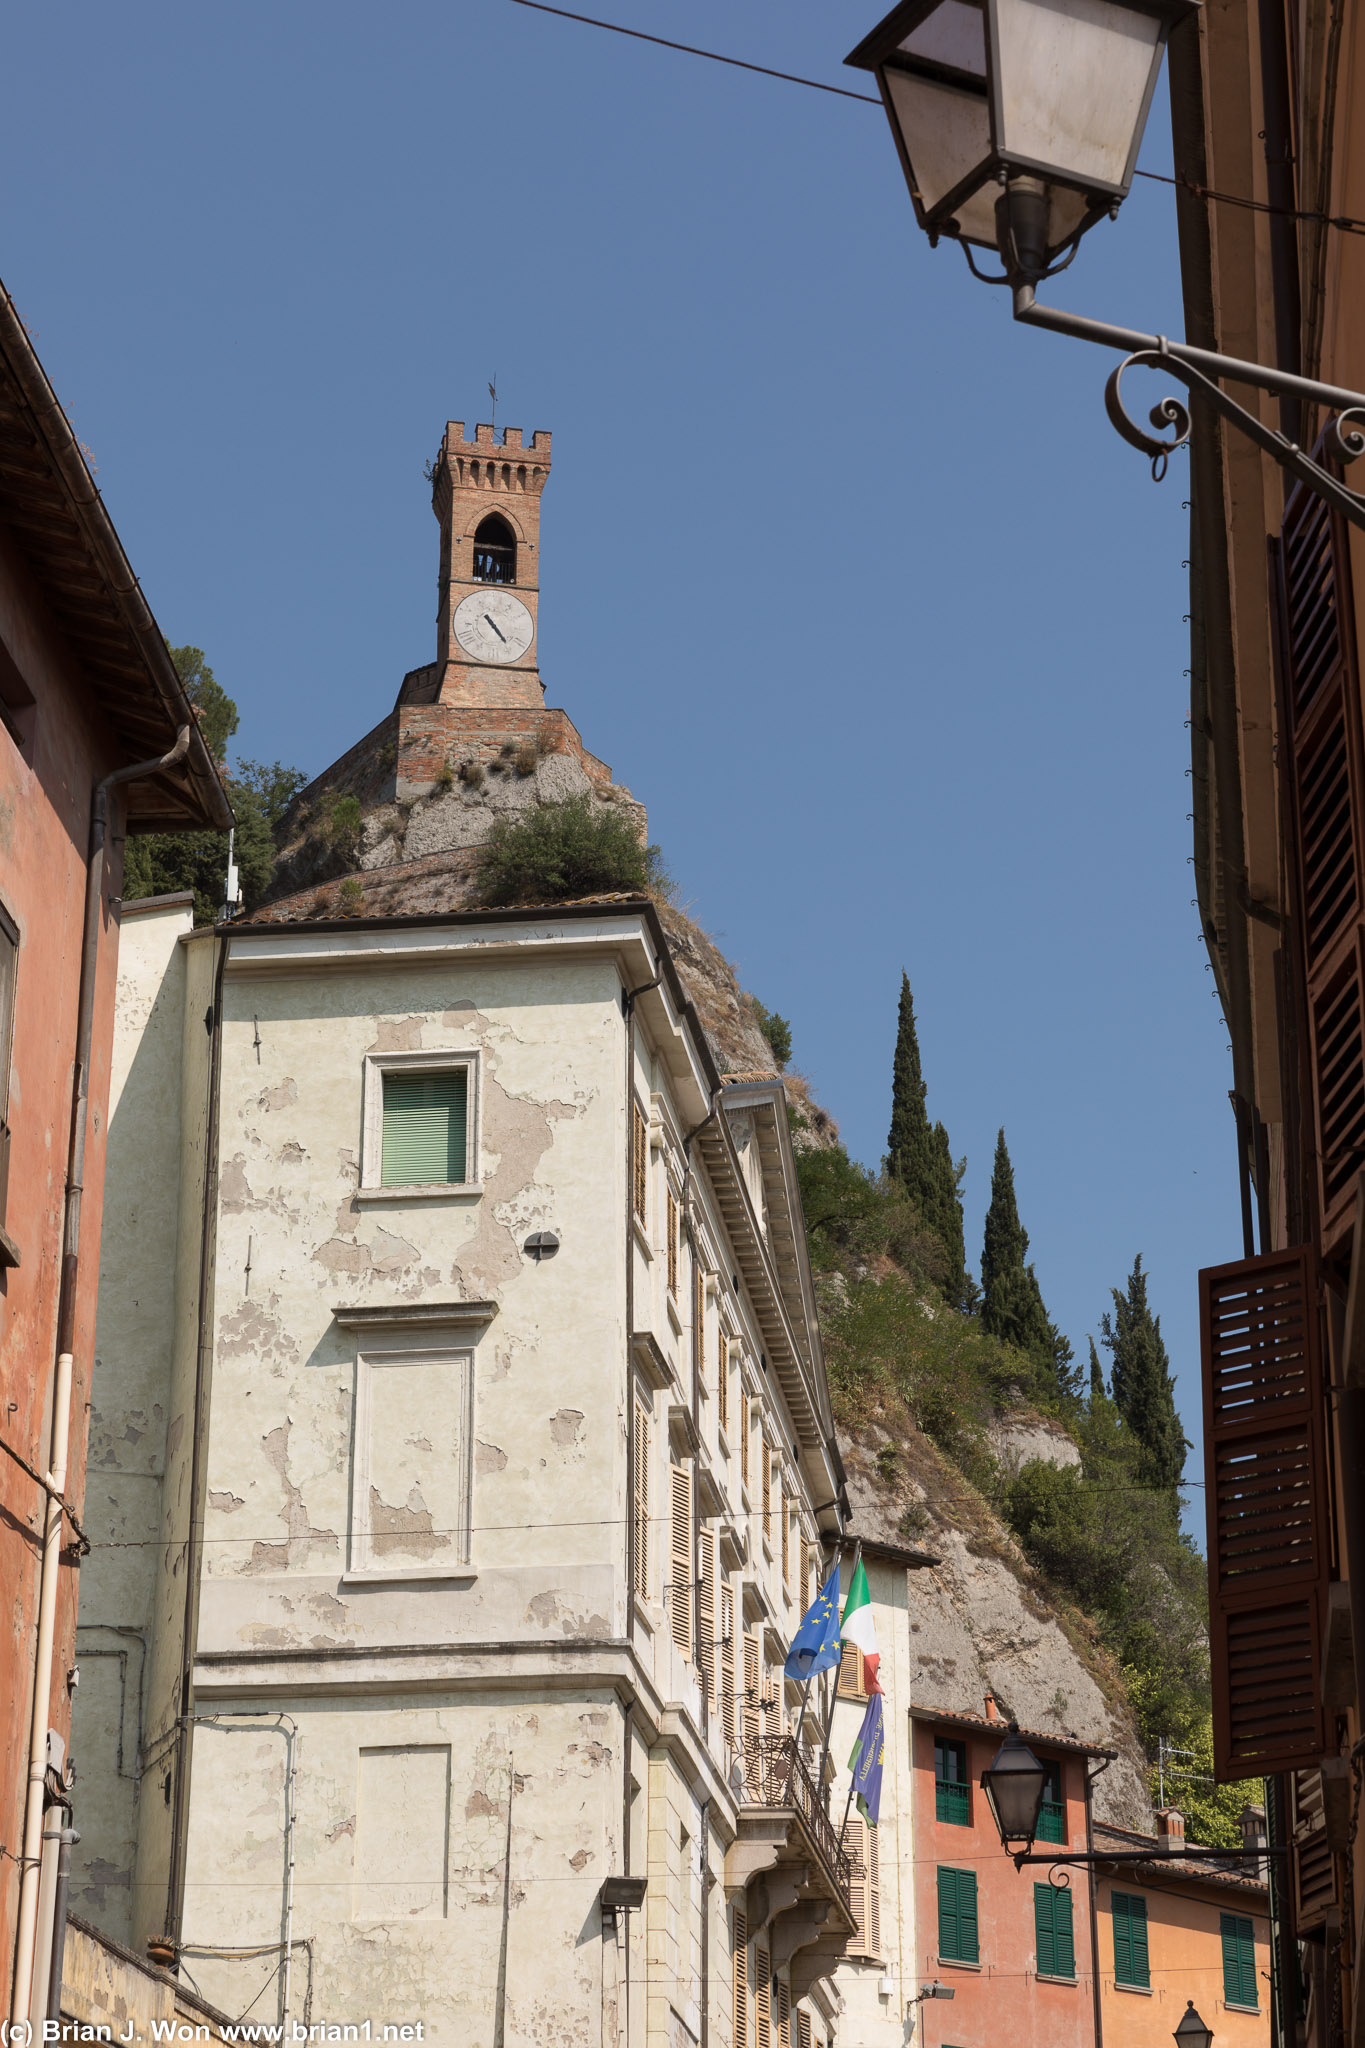 Torre dell'Orologio overlooking the town of Brisighella.